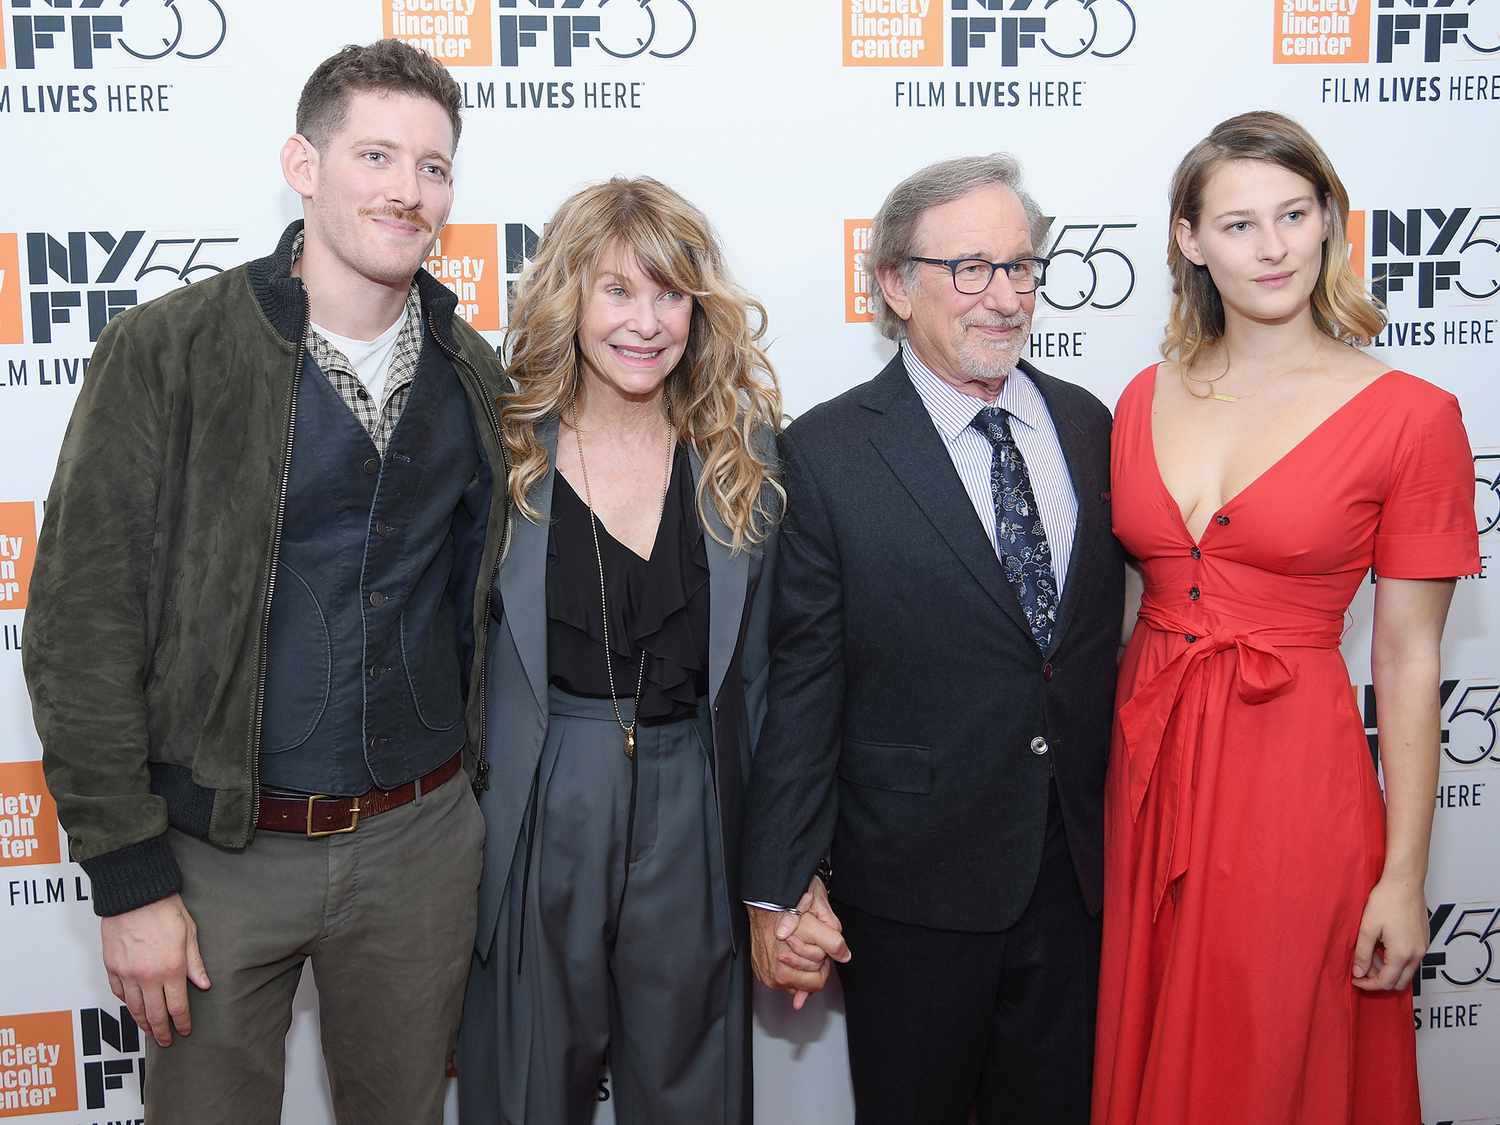 Sawyer Avery Spielberg, Kate Capshaw, Steven Spielberg and Destry Allyn Spielberg attend 55th New York Film Festival screening of "Spielberg" at Alice Tully Hall on October 5, 2017 in New York City